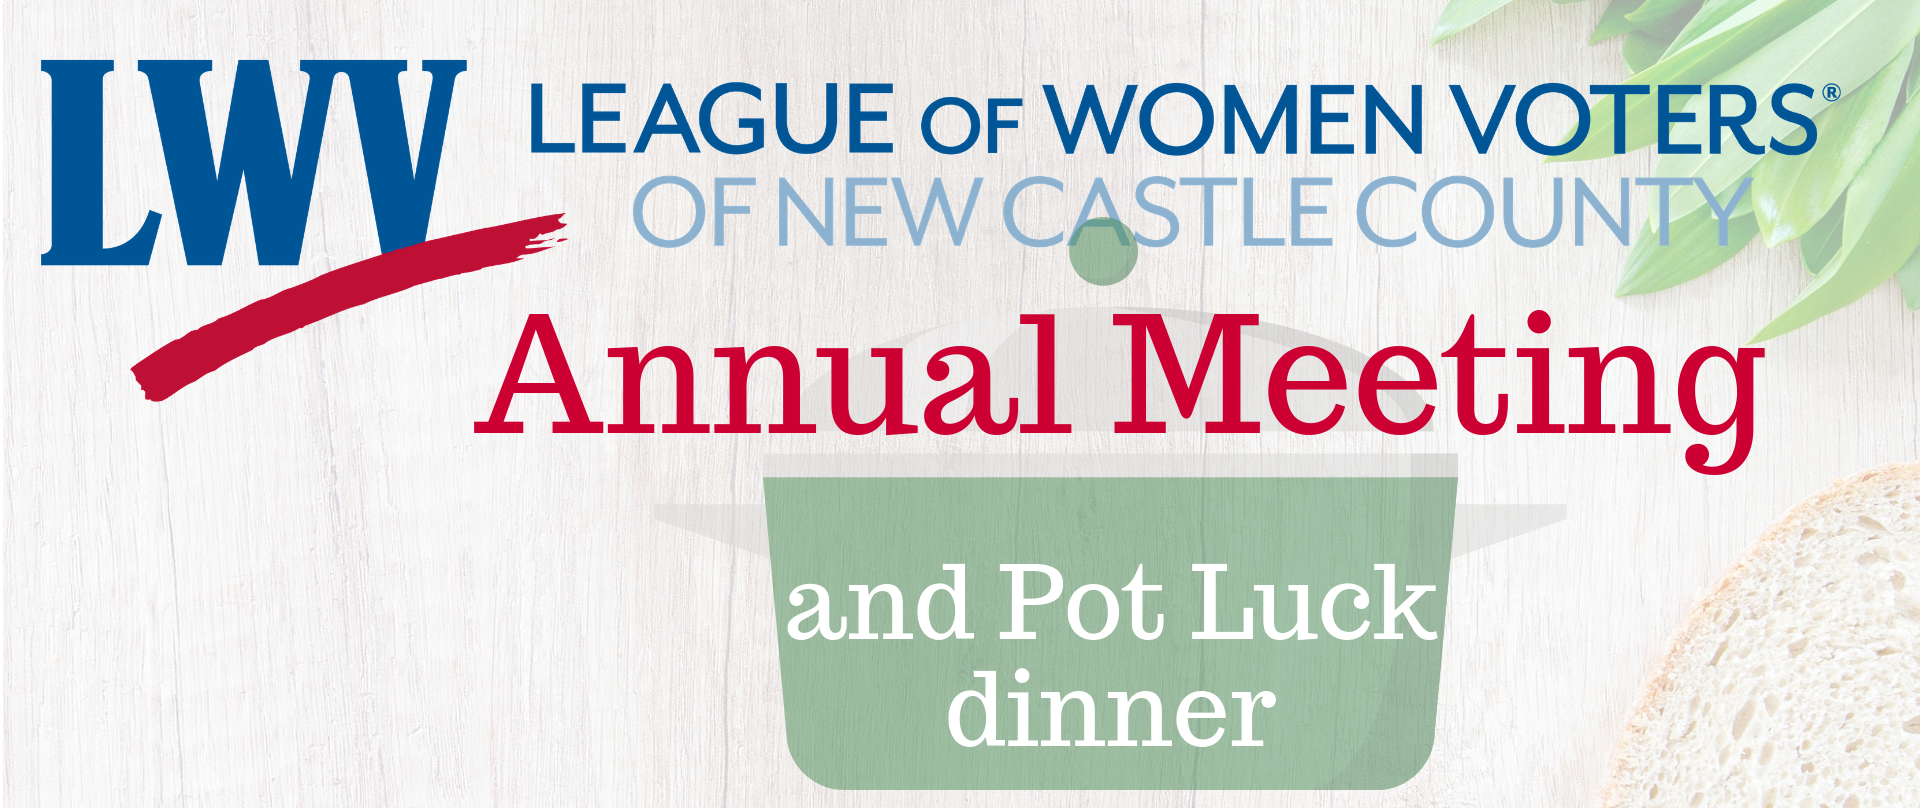 League of Women Voters of New Castle County Annual Meeting and Pot Luck dinner